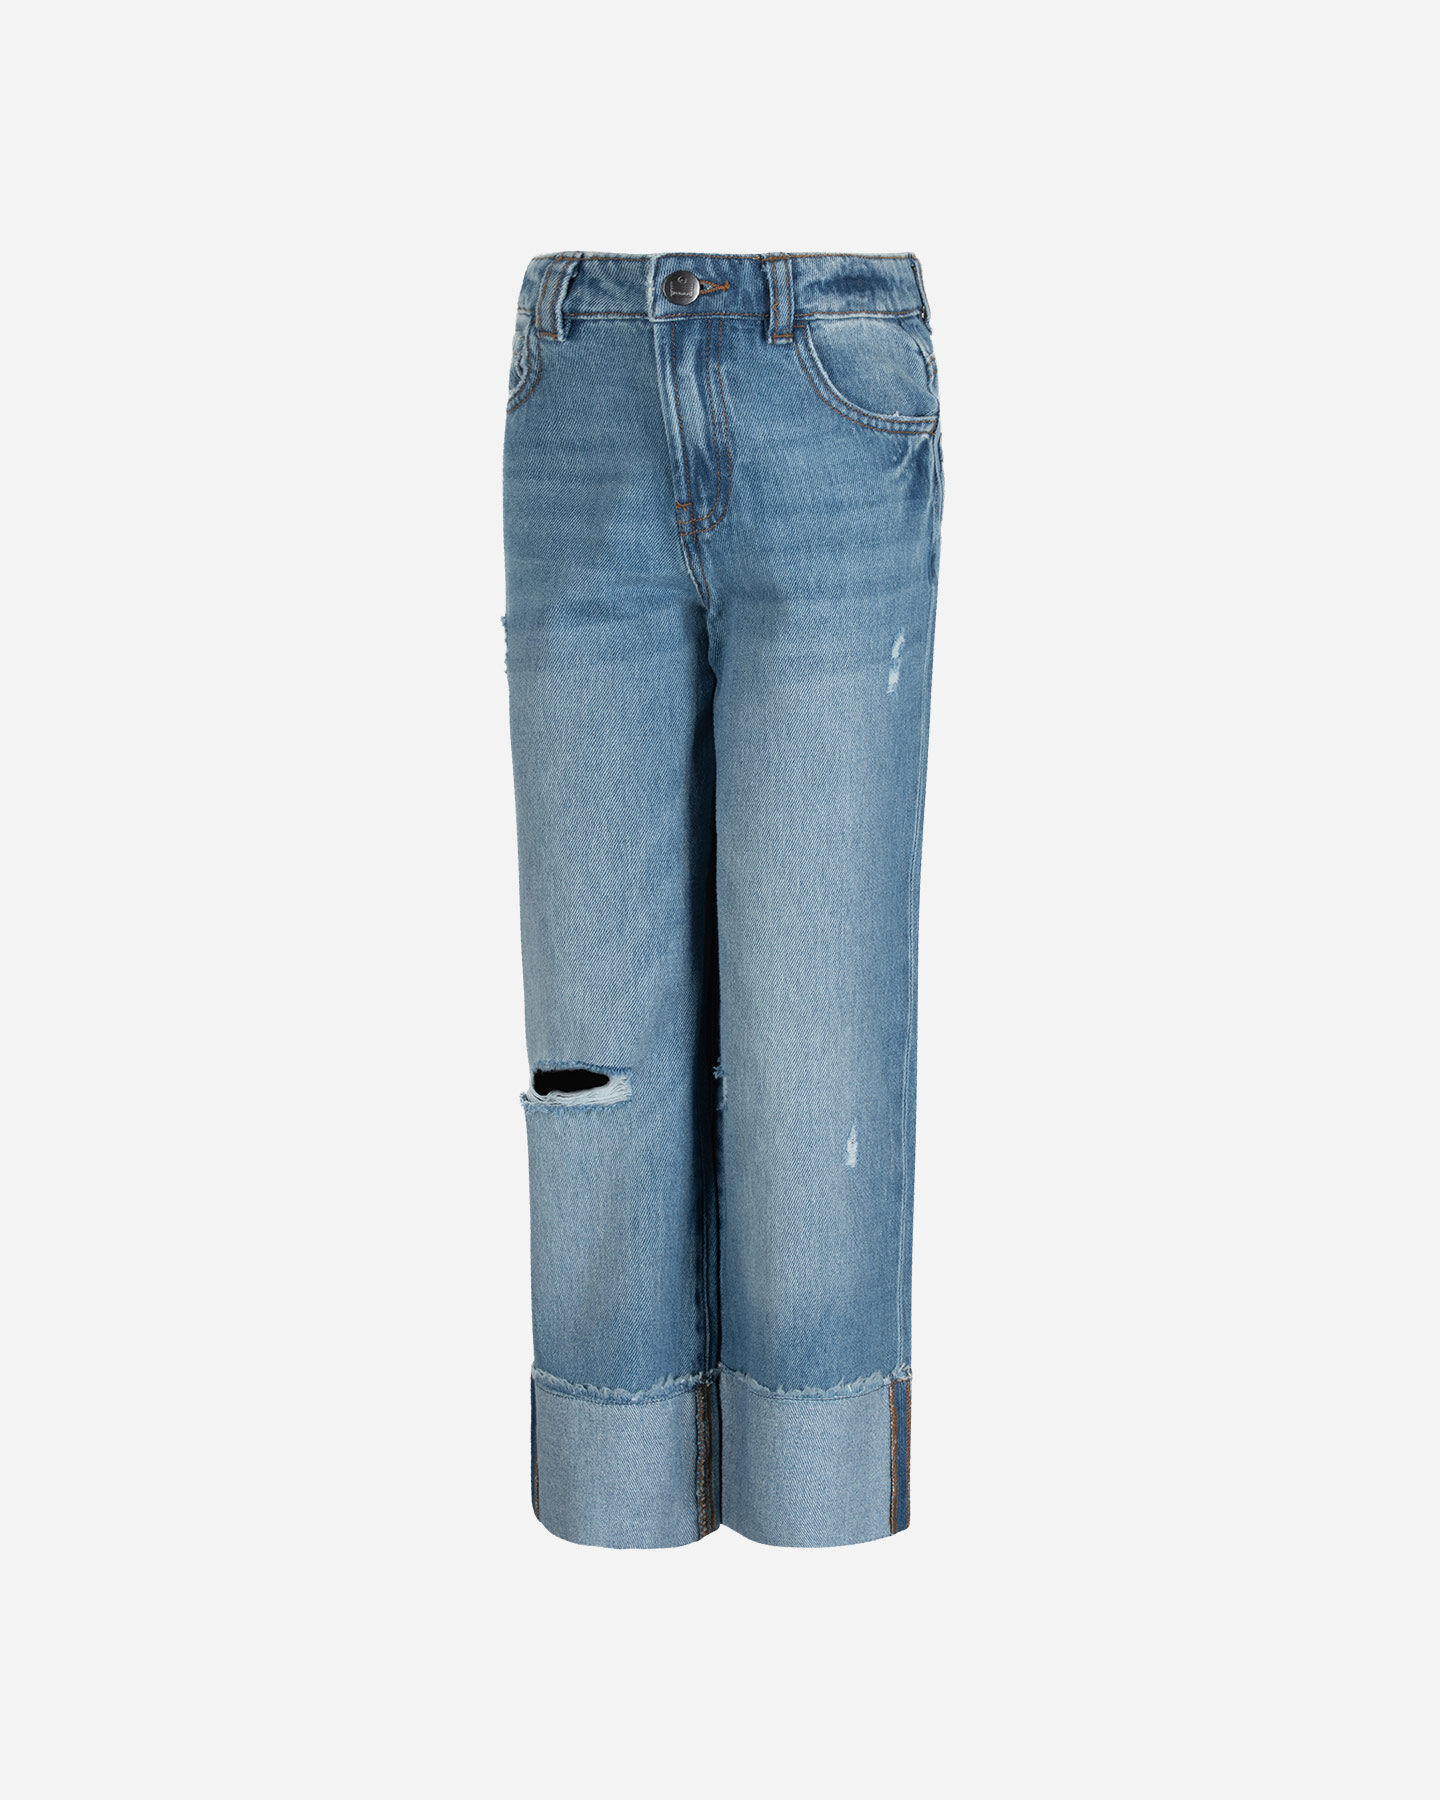  Jeans ADMIRAL LIFESTYLE JR S4119402|MD|8A scatto 0